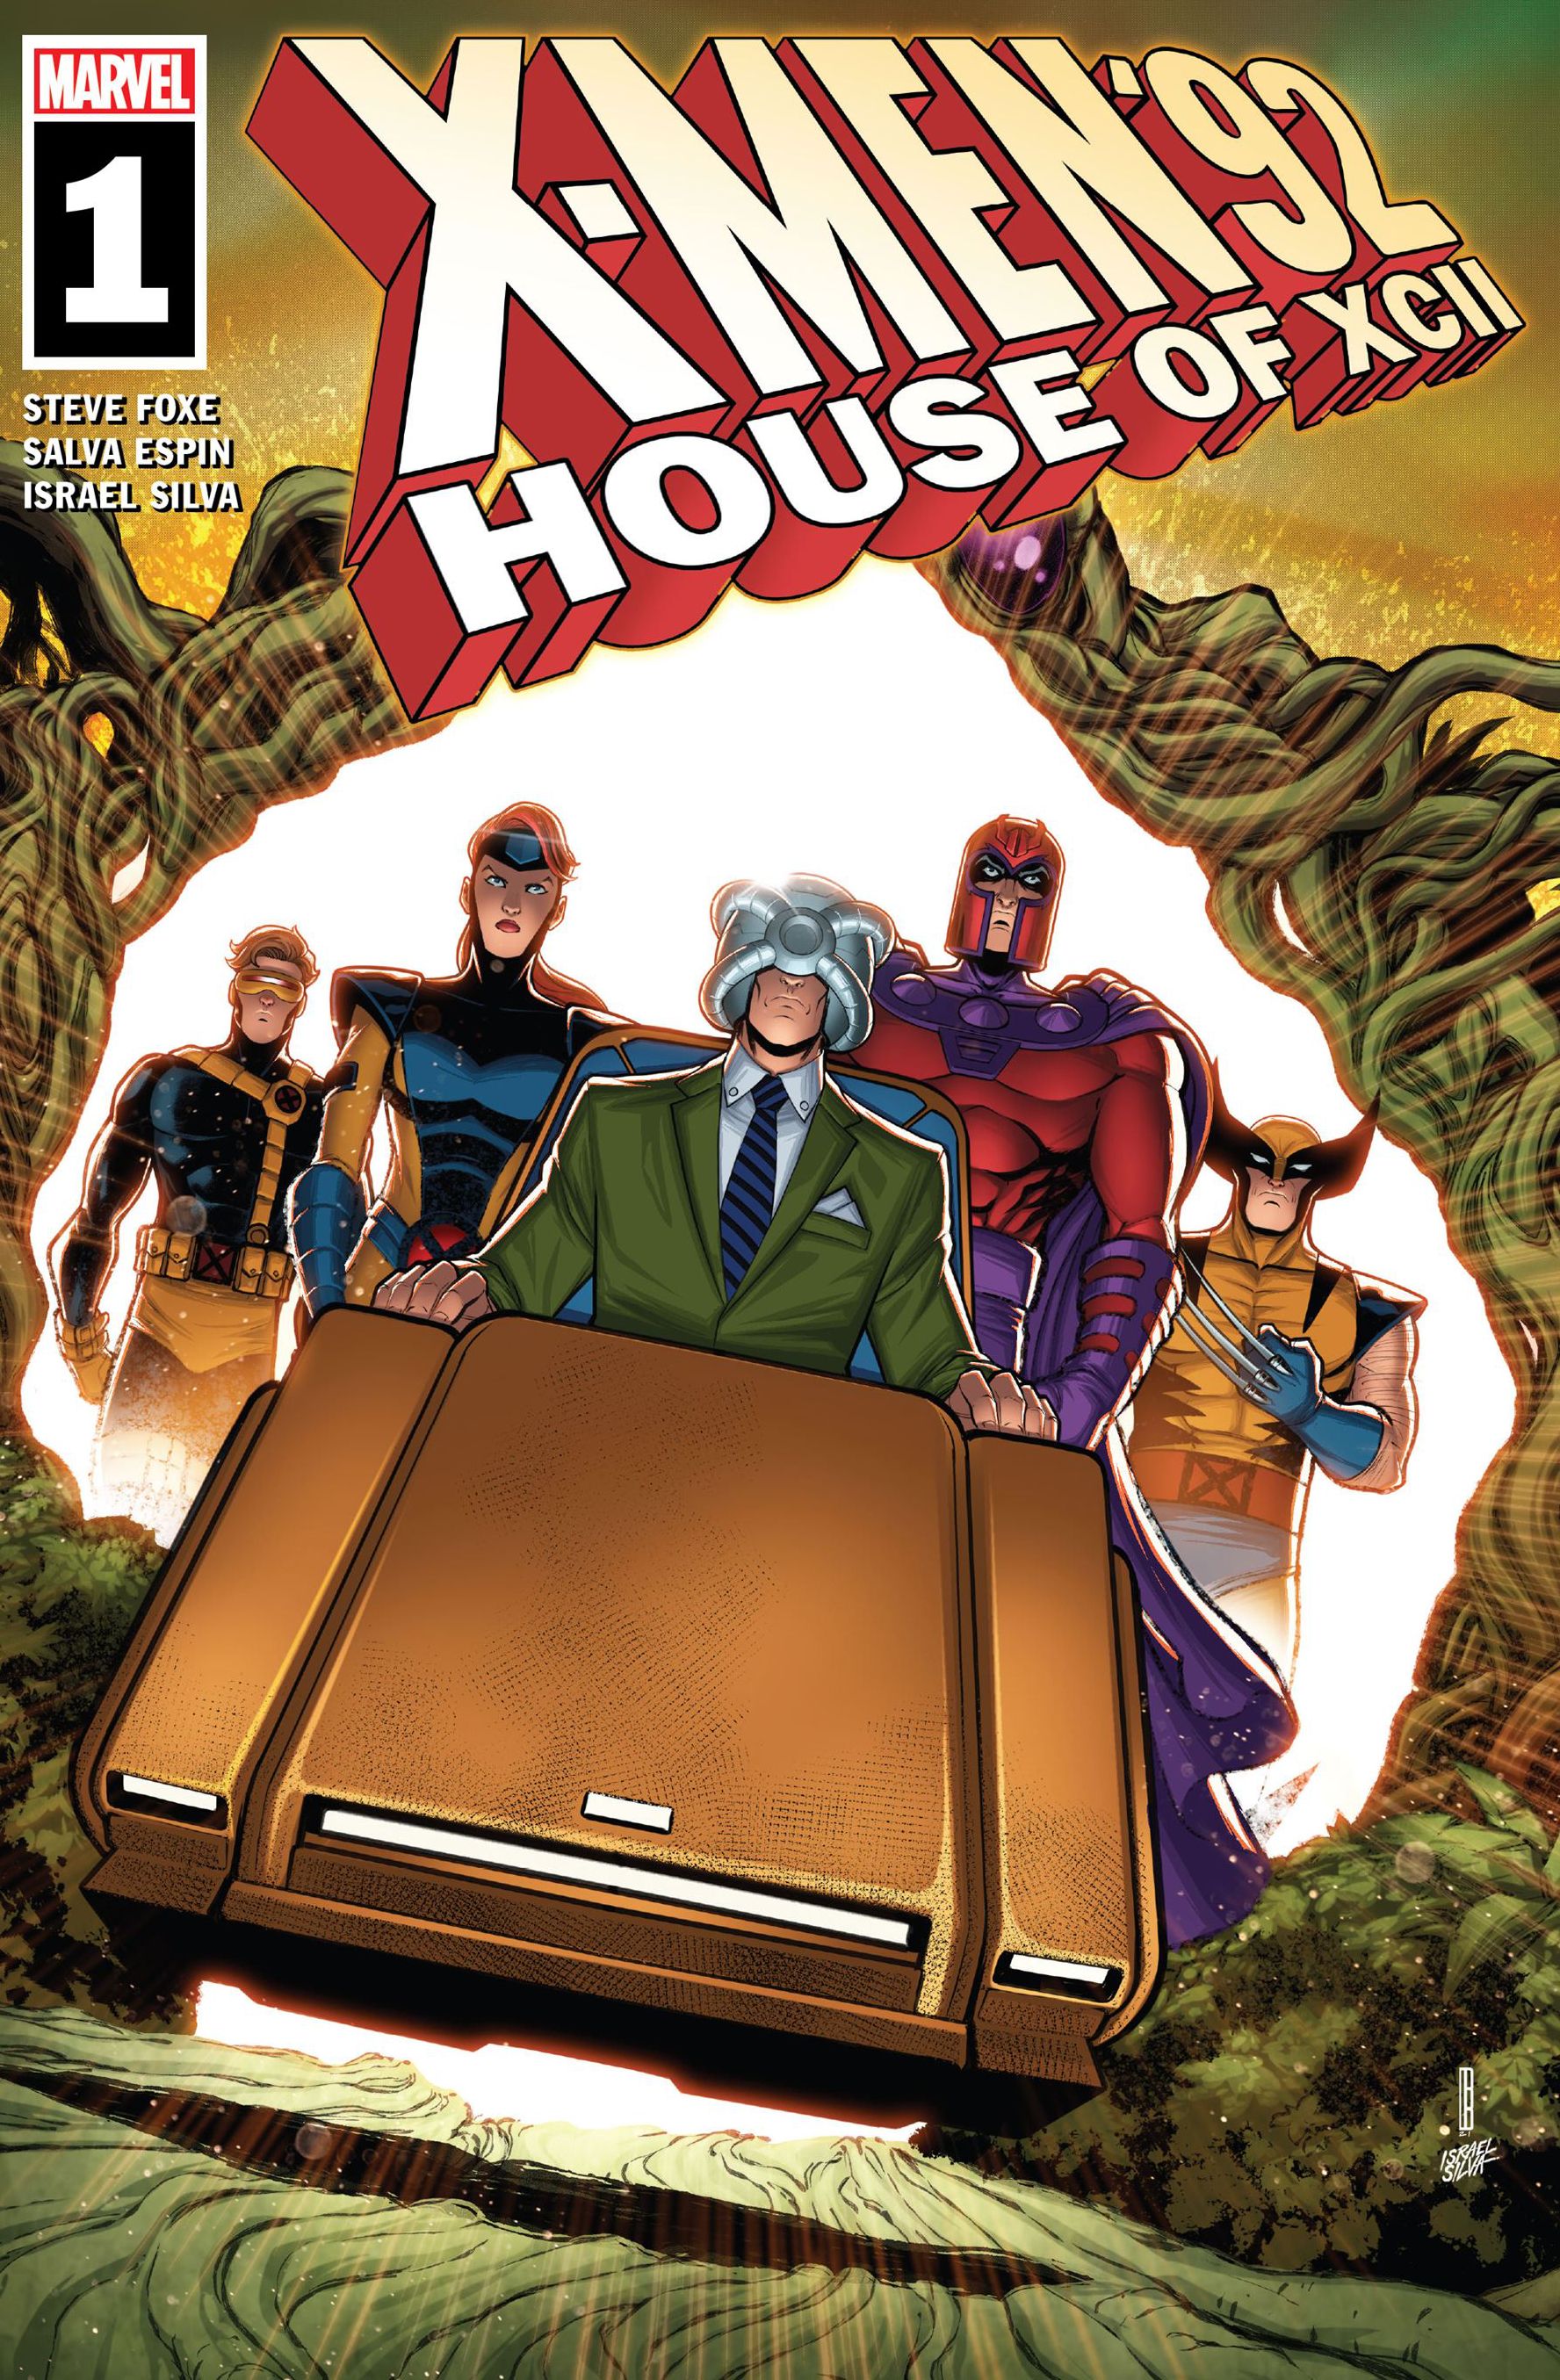 x-men '92 house of xcii #1 cover